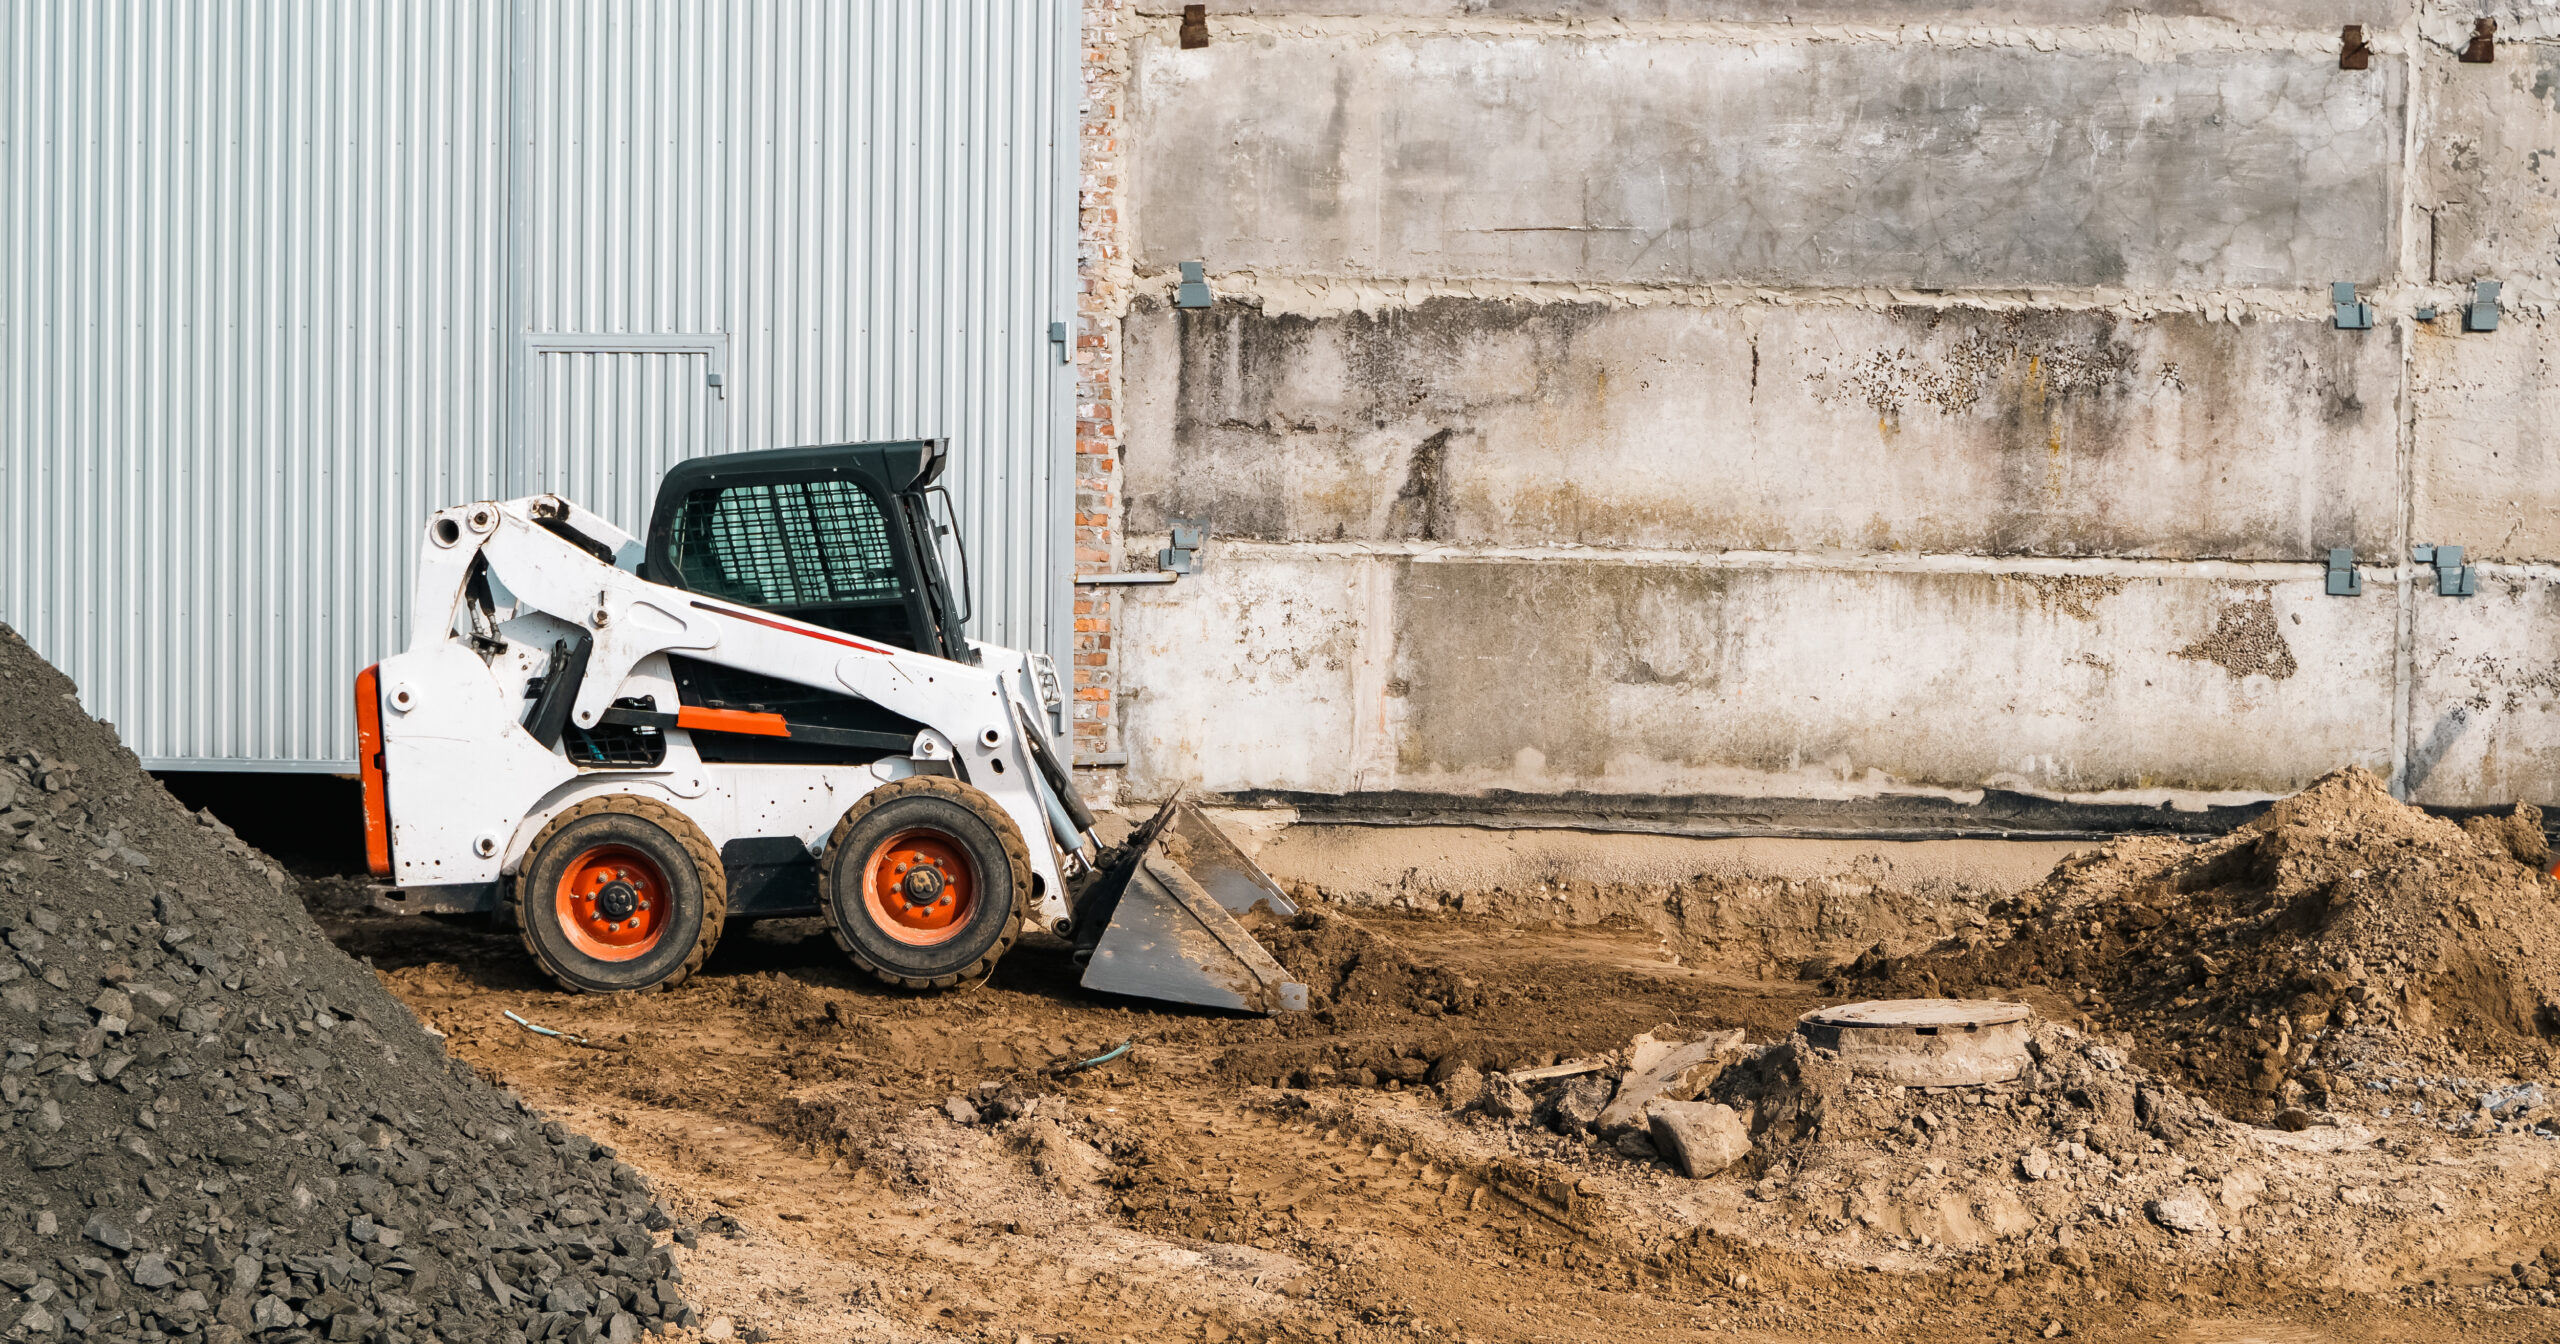 Skid steer material handling - Rockland Manufacturing skid steer attachments